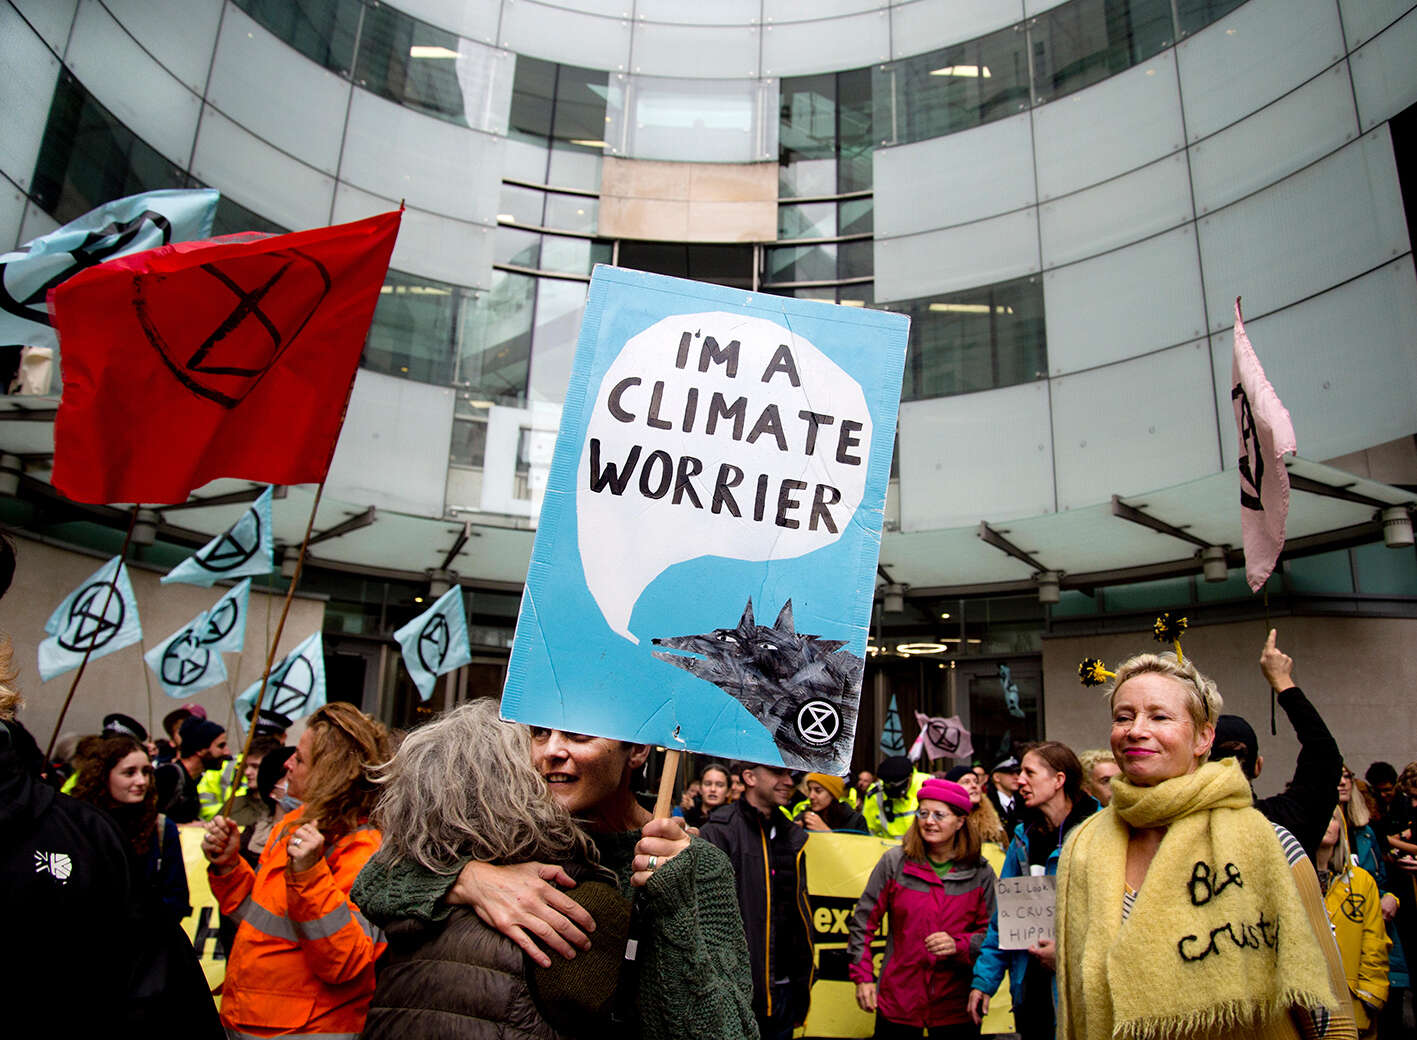 How the BBC became a “football” in the climate culture war